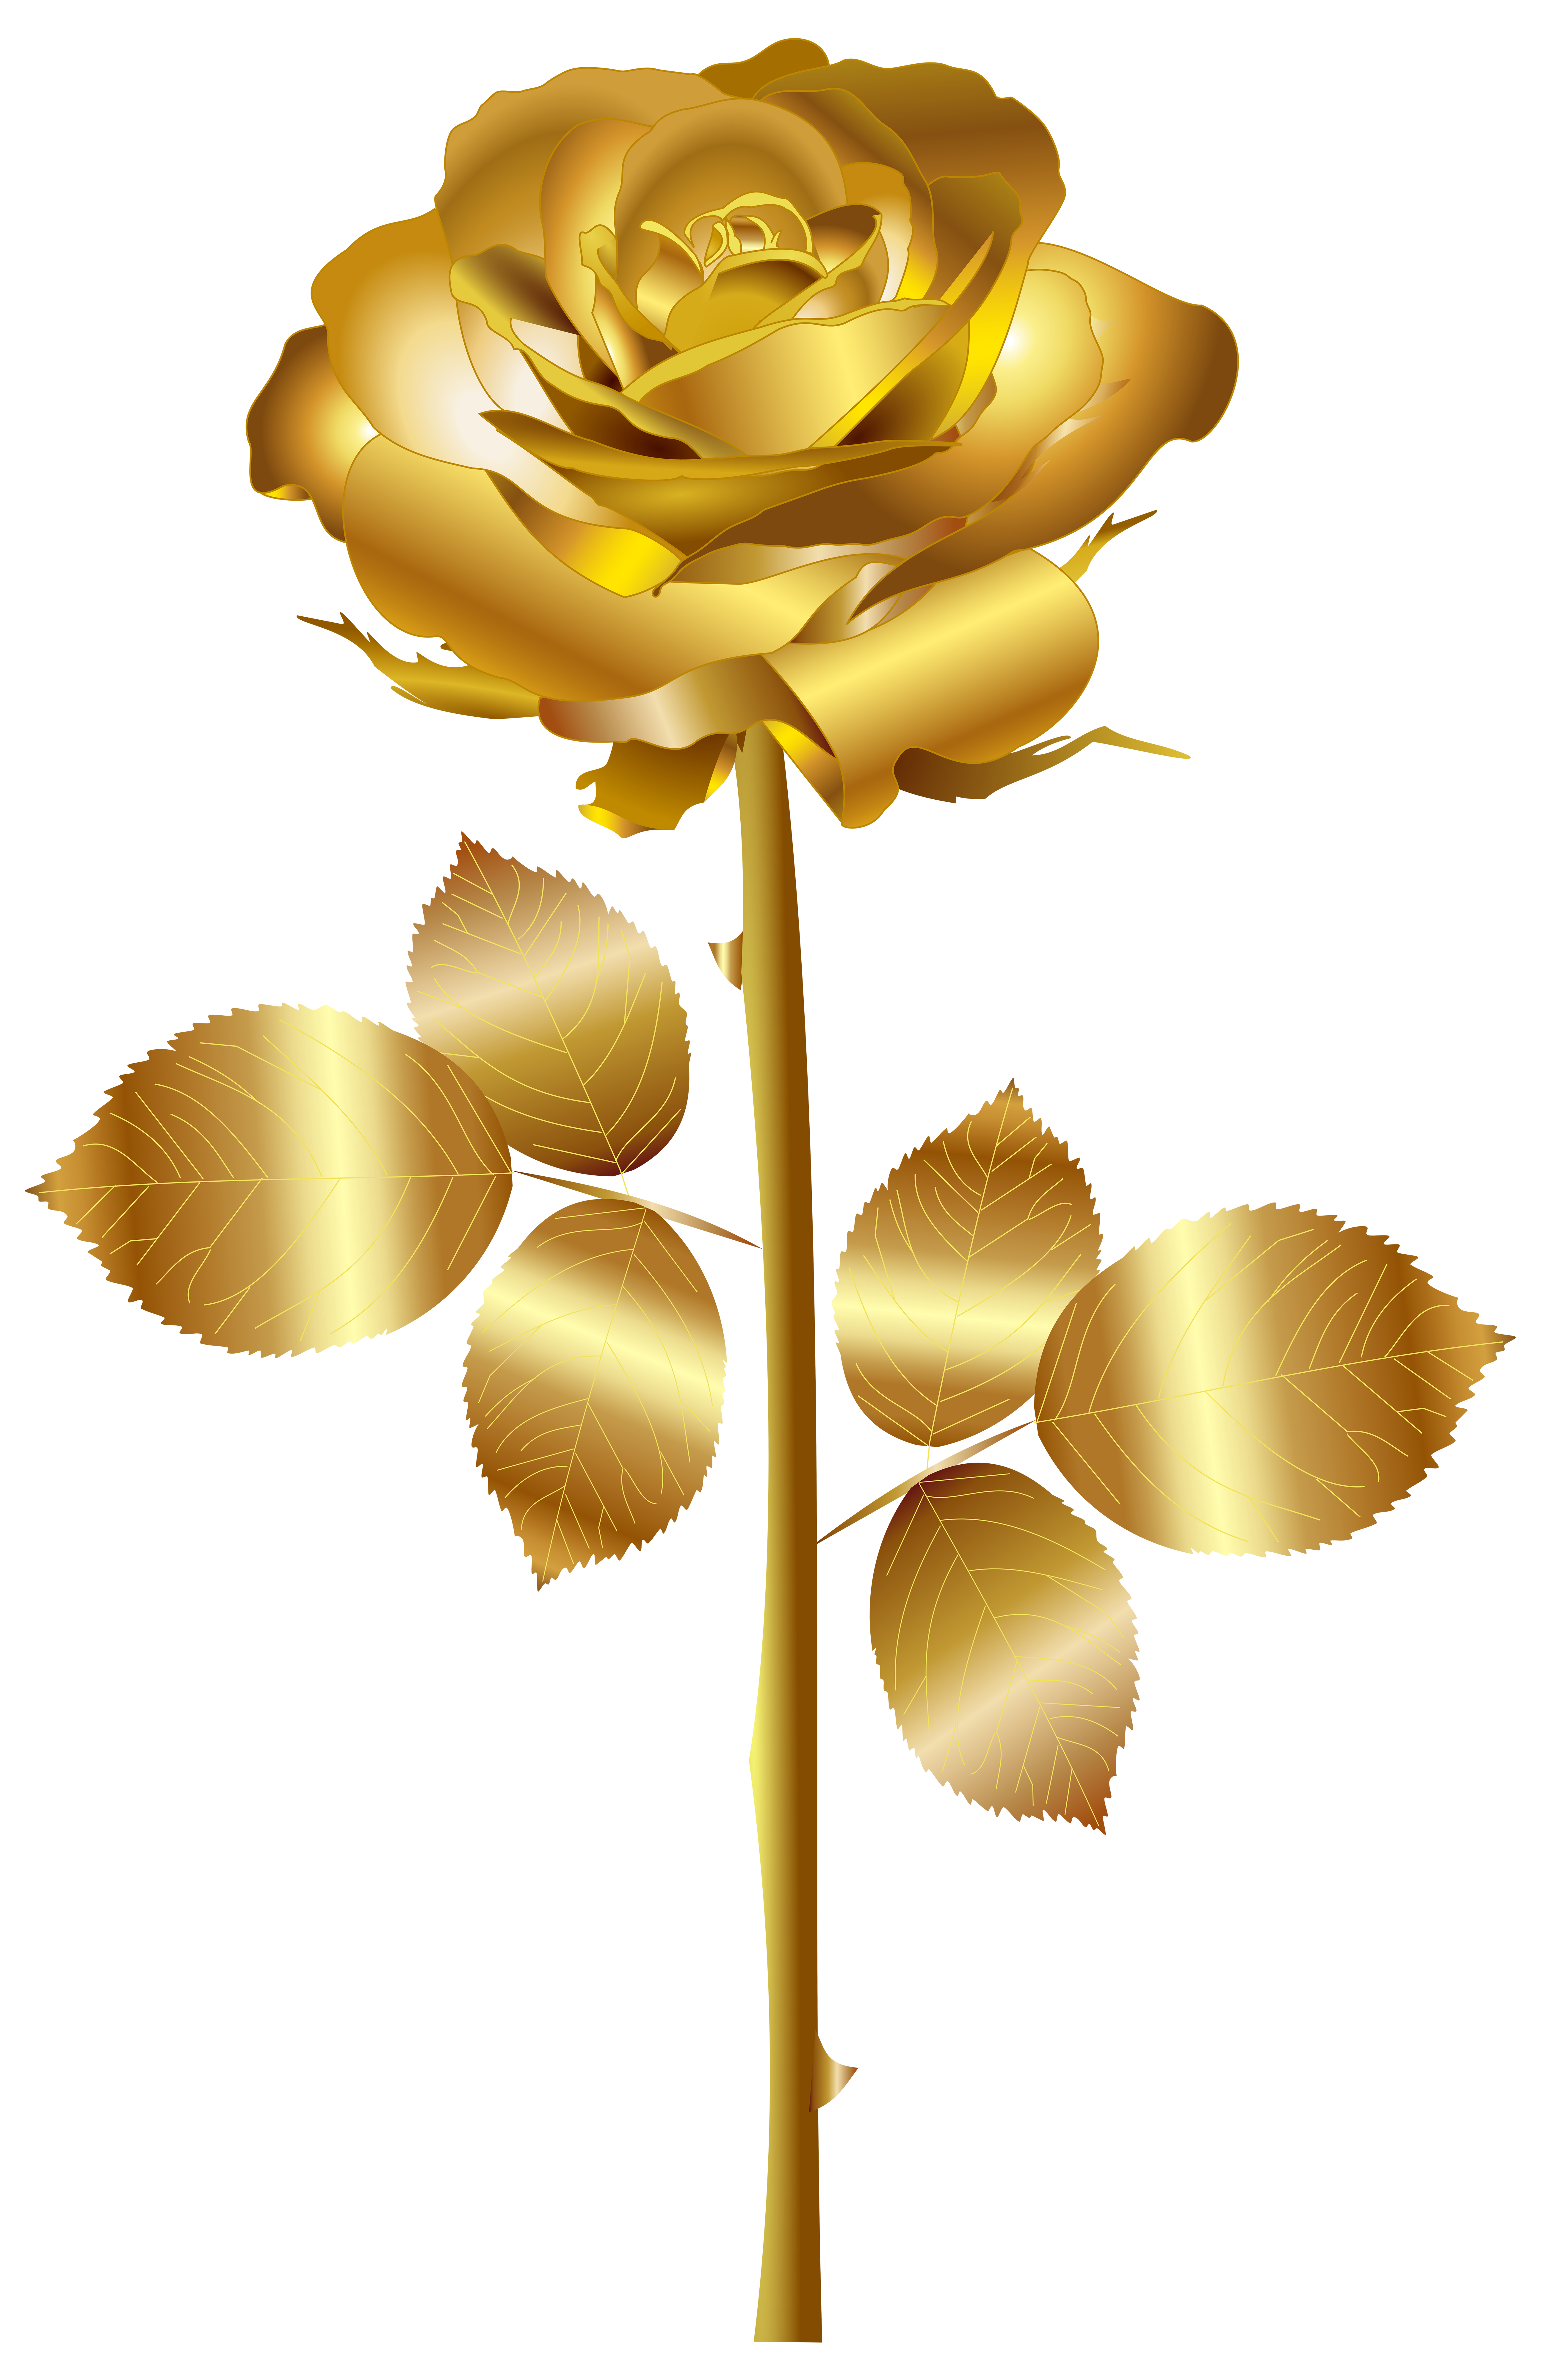 Gold Rose PNG Clip Art Image​-Quality Image and Transparent PNG Free Clipart